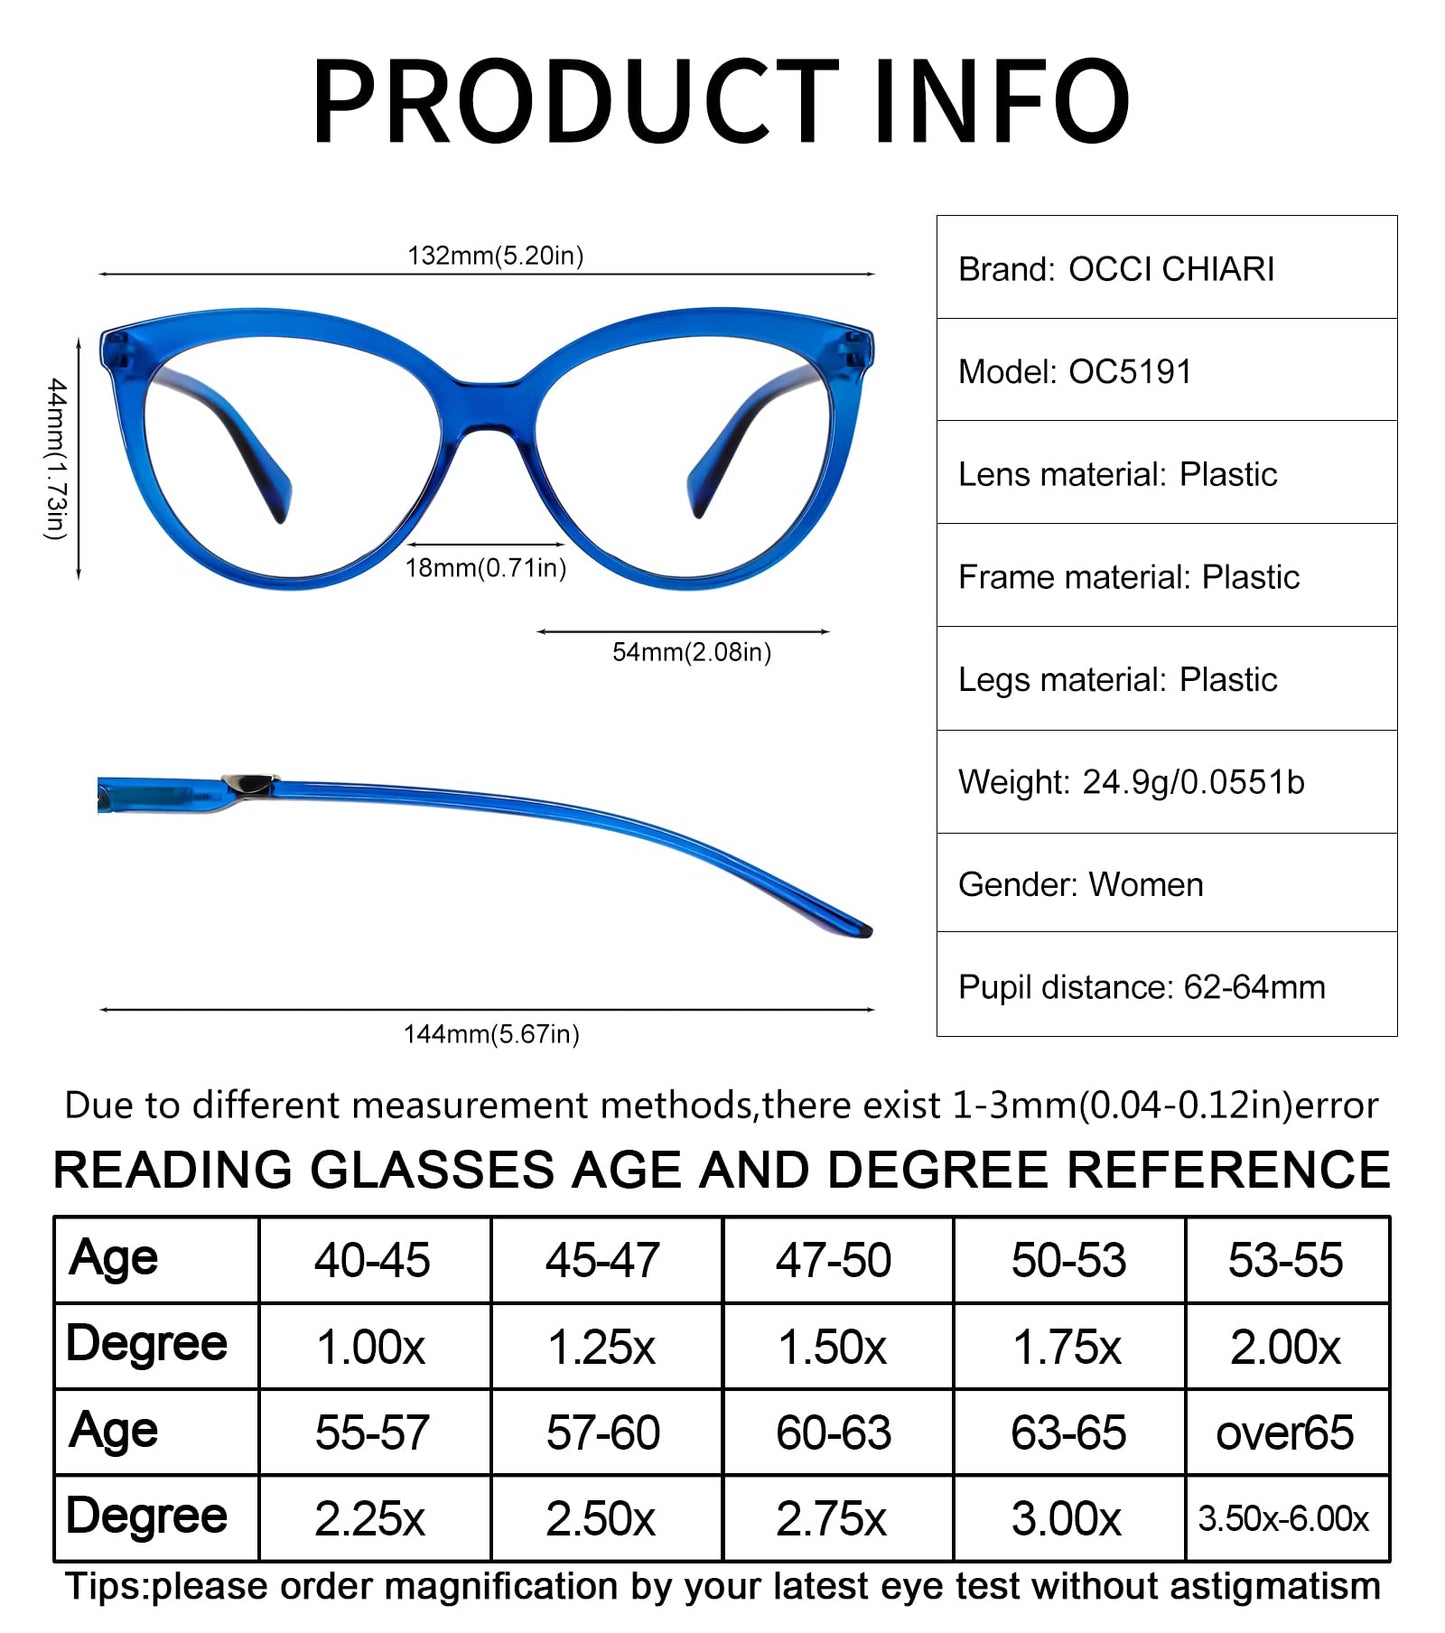 OCCI CHIARI Women's Readers Sturdy Reading Glasses with Metal Spring Hinge(1.0 1.25 1.5 1.75 2.0 2.25 2.5 2.75 3.0 3.5)